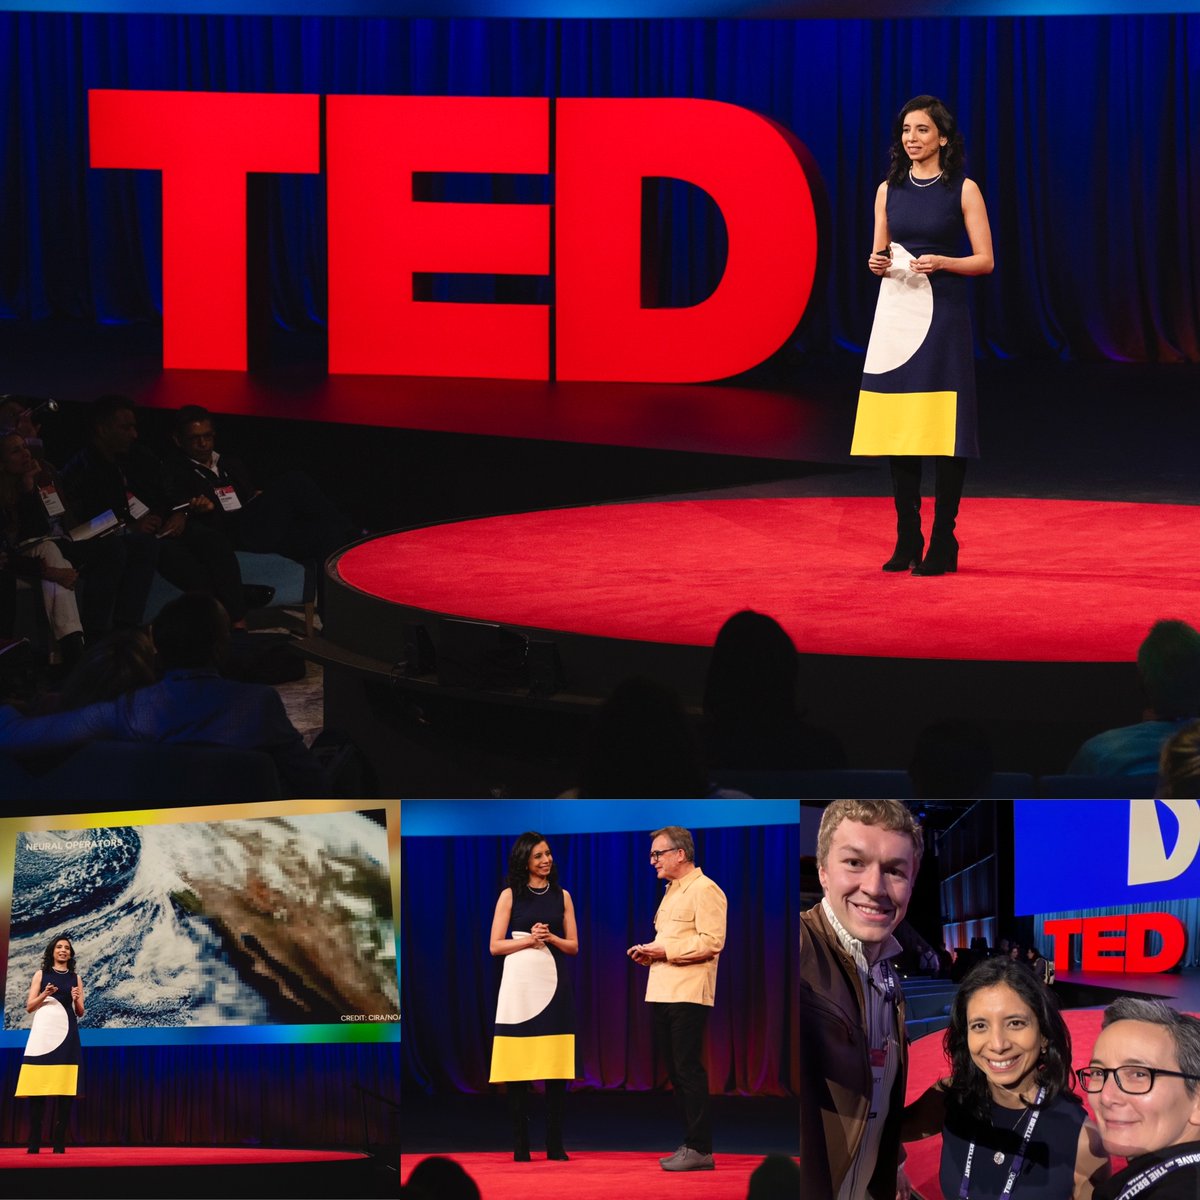 It is hard to put into words my experience speaking at  @TEDTalks It was exhilarating, fulfilling, inspiring! Thank you @SCR10 for tirelessly helping me shape my talk and  @TEDchris for all the feedback. Thank you @bjenik for being my cheerleader and a partner in making this talk